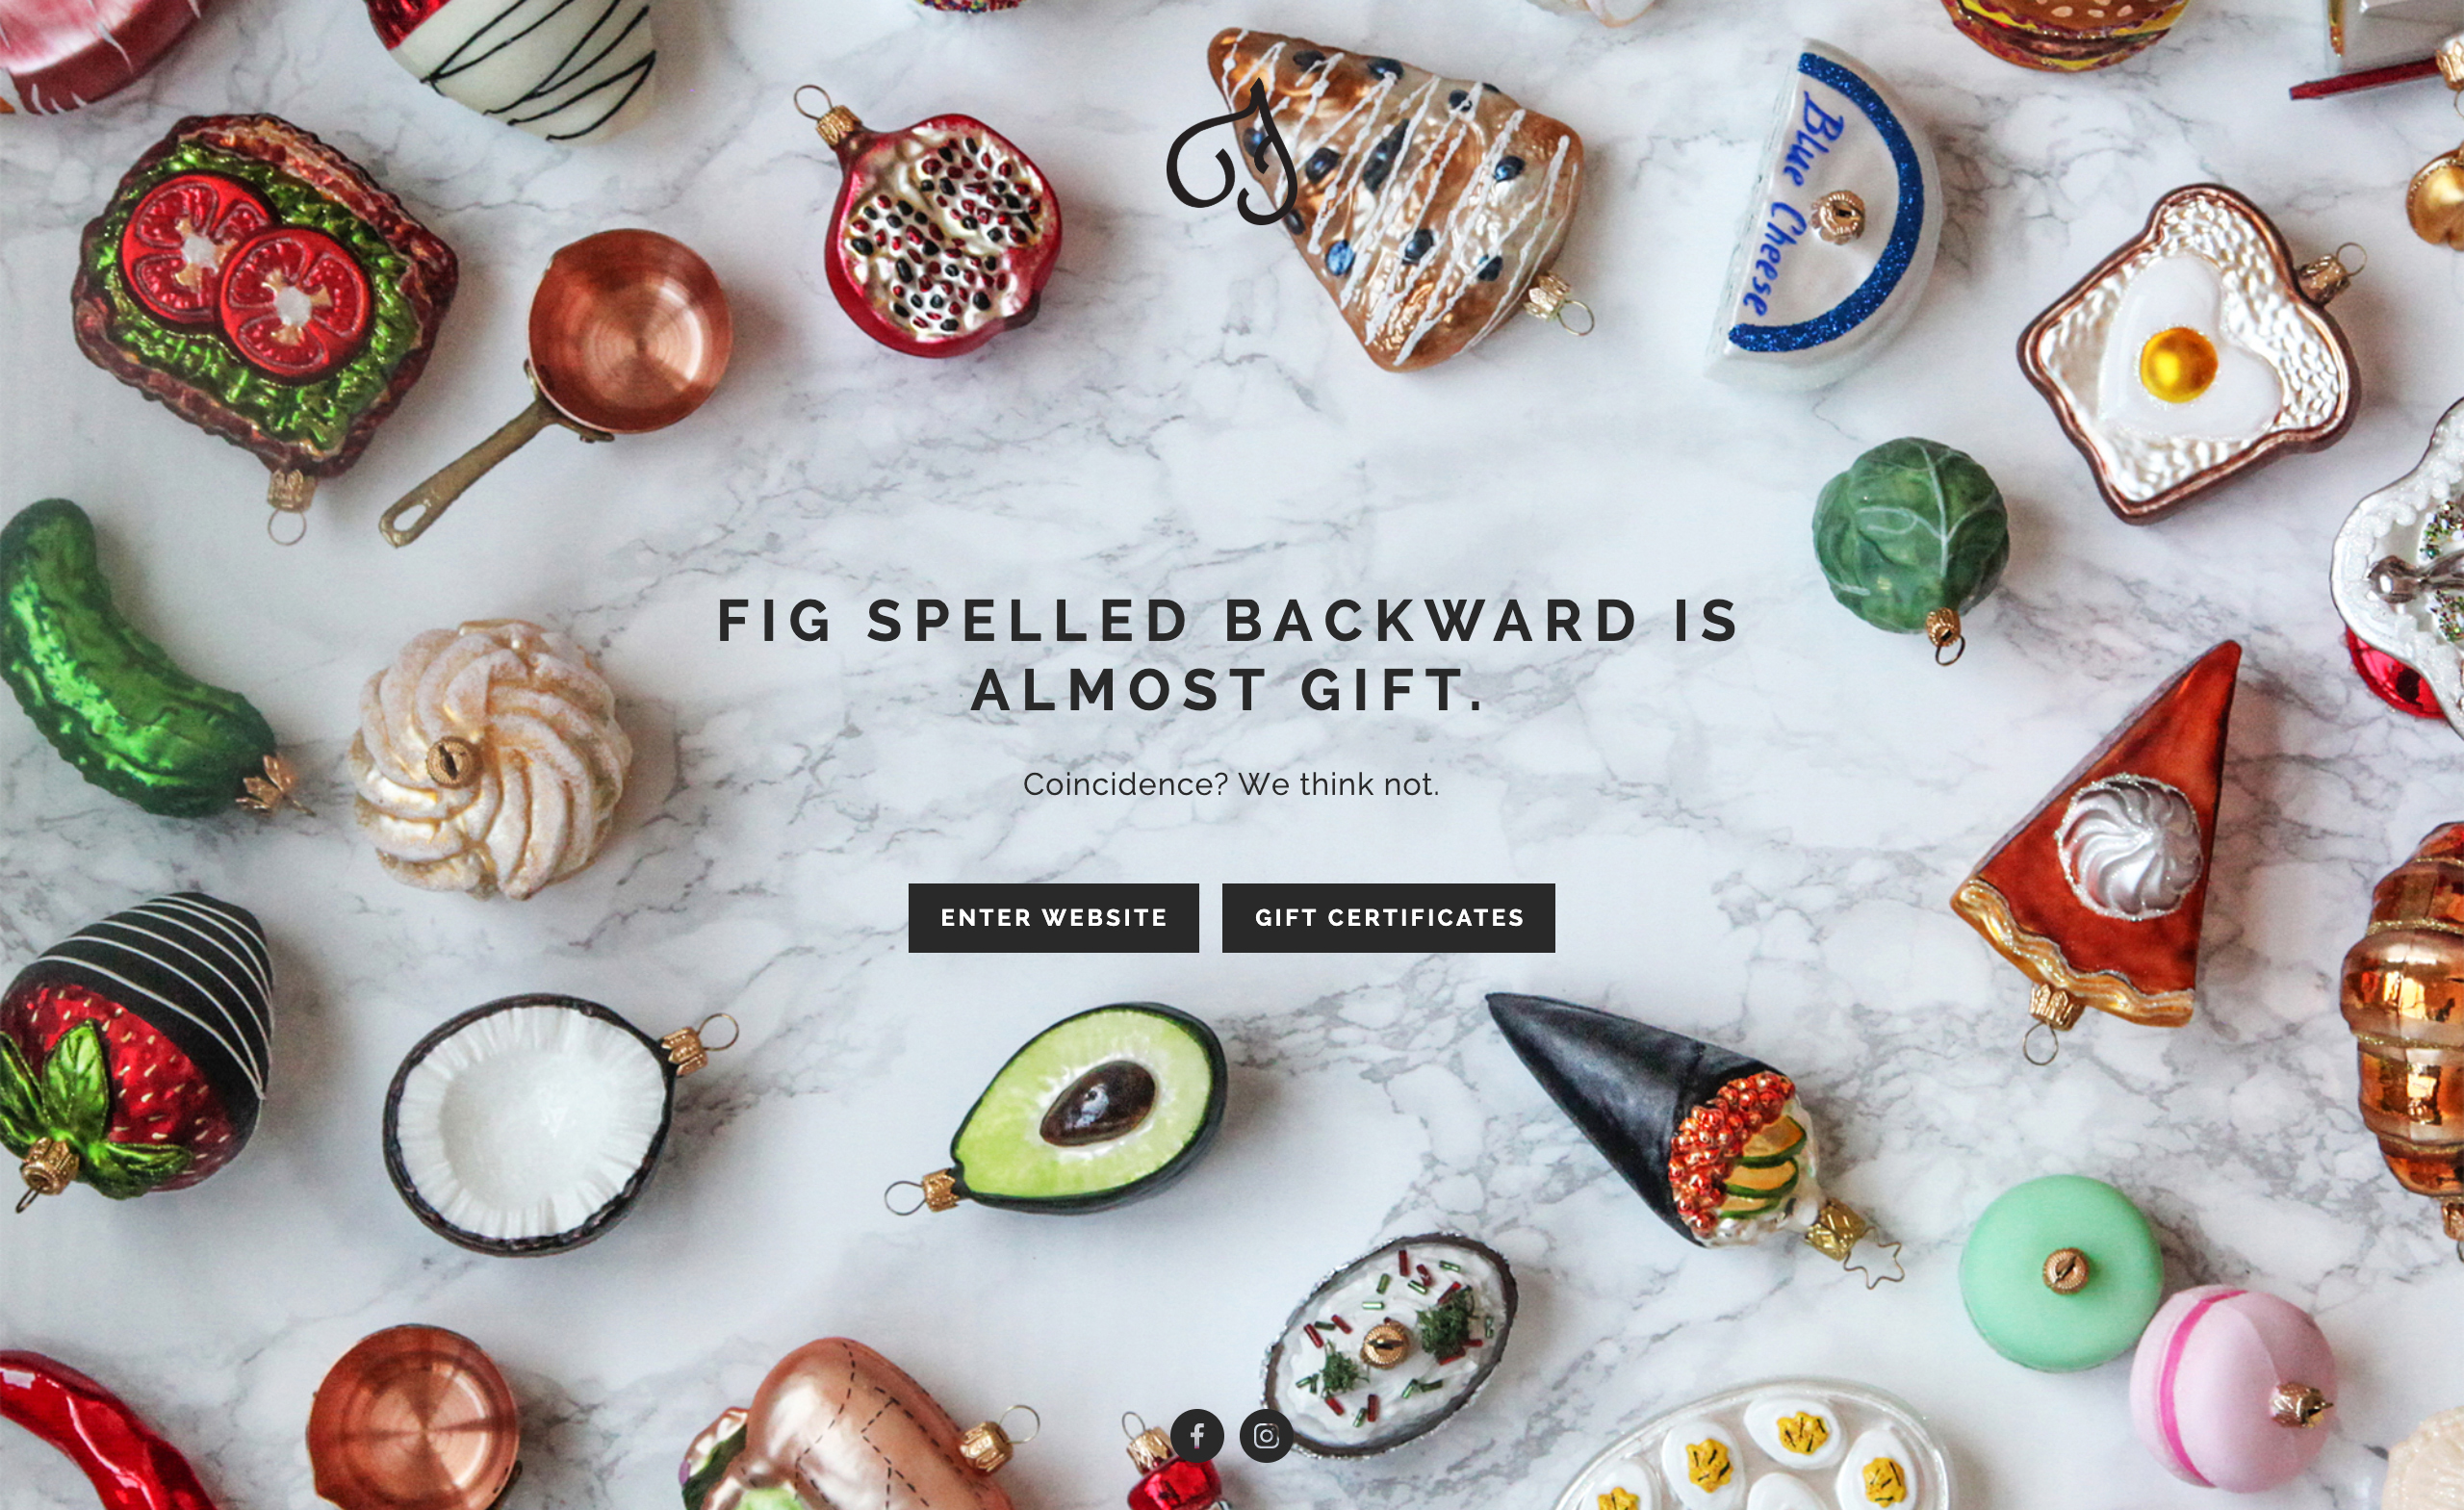 An image of the alternative holiday homepage for The Fig Cooking SChool. Food ornaments are scattered on a marble backdrop with a headline that says 'FIg Spelled Backward is almost Gift. Coincidence? We think not.' with links to enter the website or buy a gift certificate.